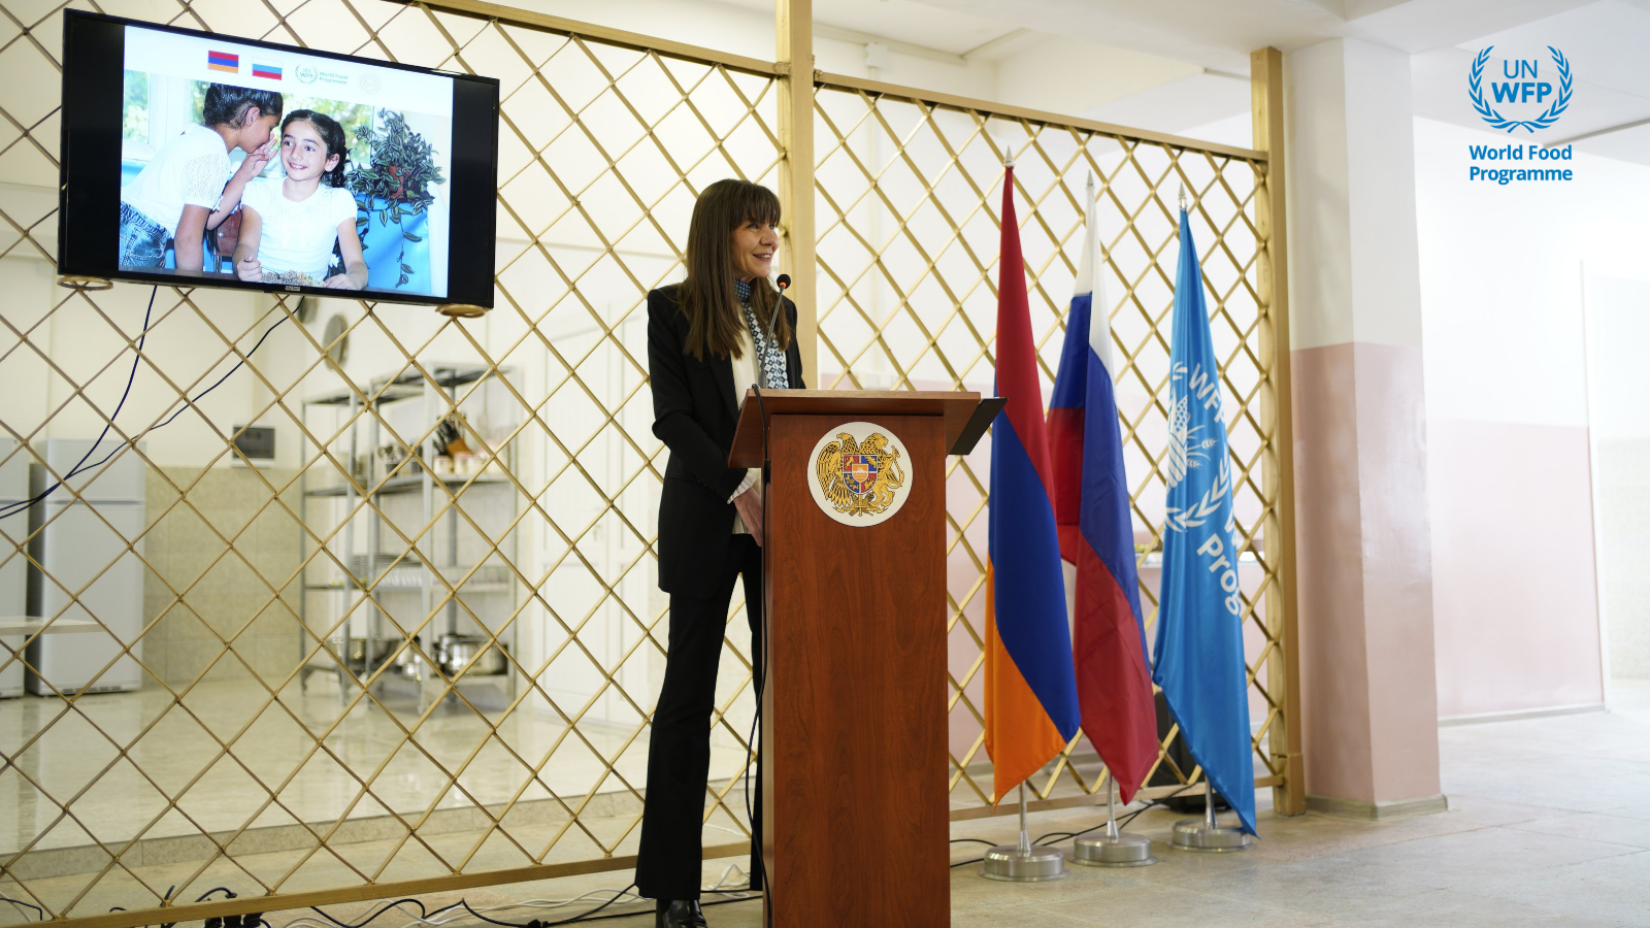 WFP Country Director and Representative in Armenia, Jelena Milosevic gives an opening speech.